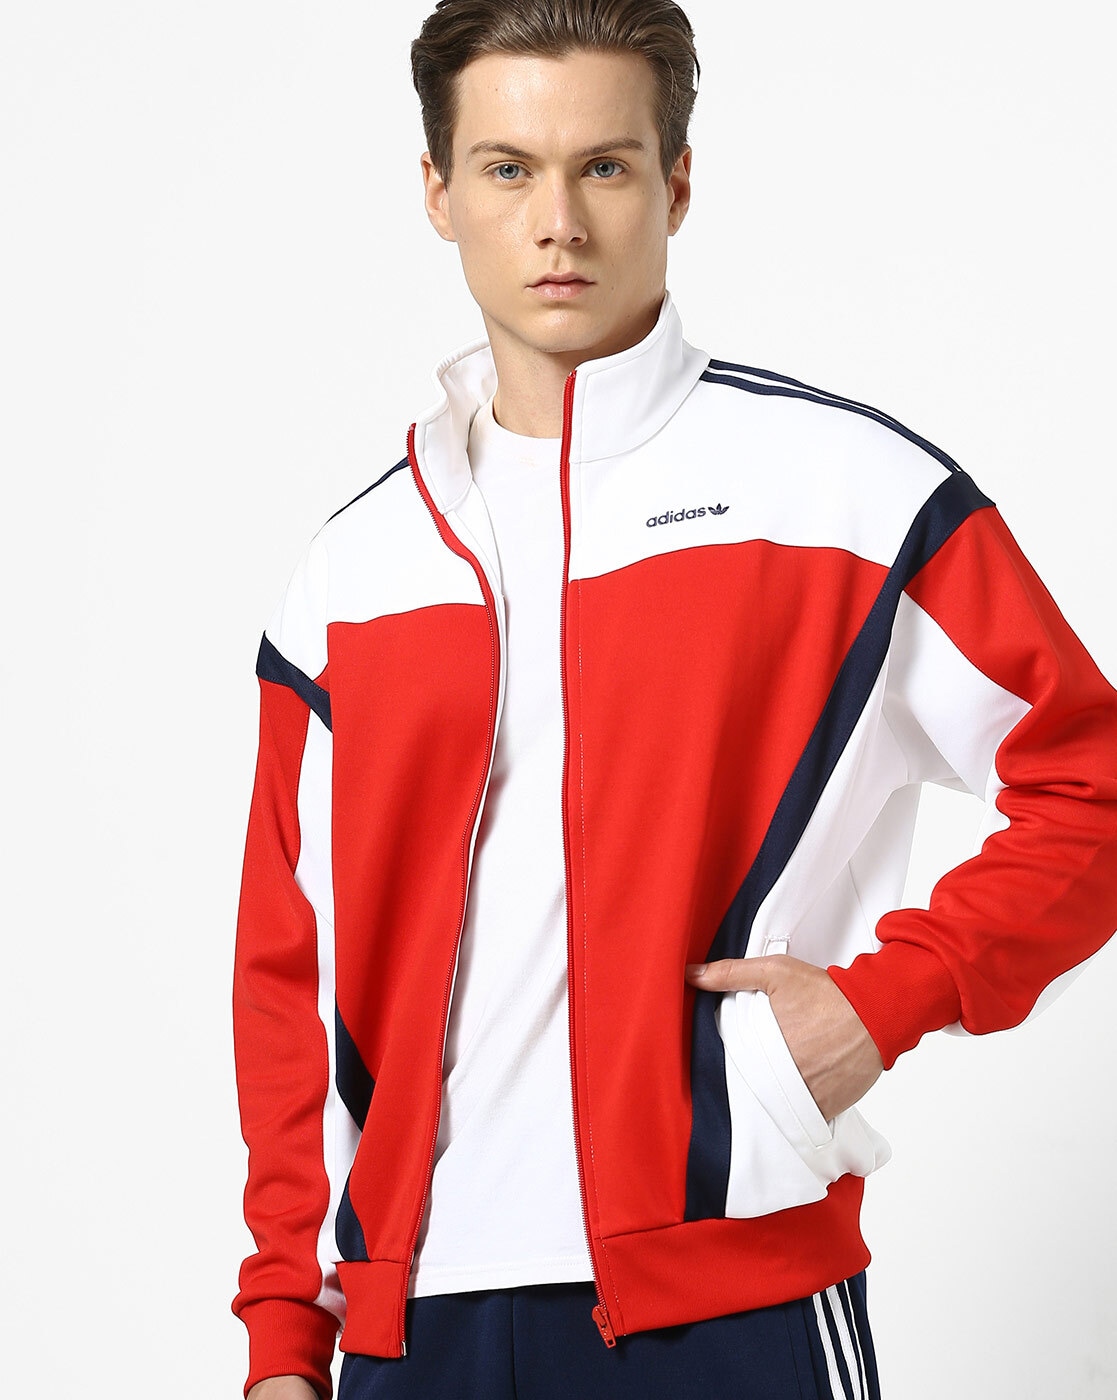 Details 84+ red and white adidas jacket - in.thdonghoadian